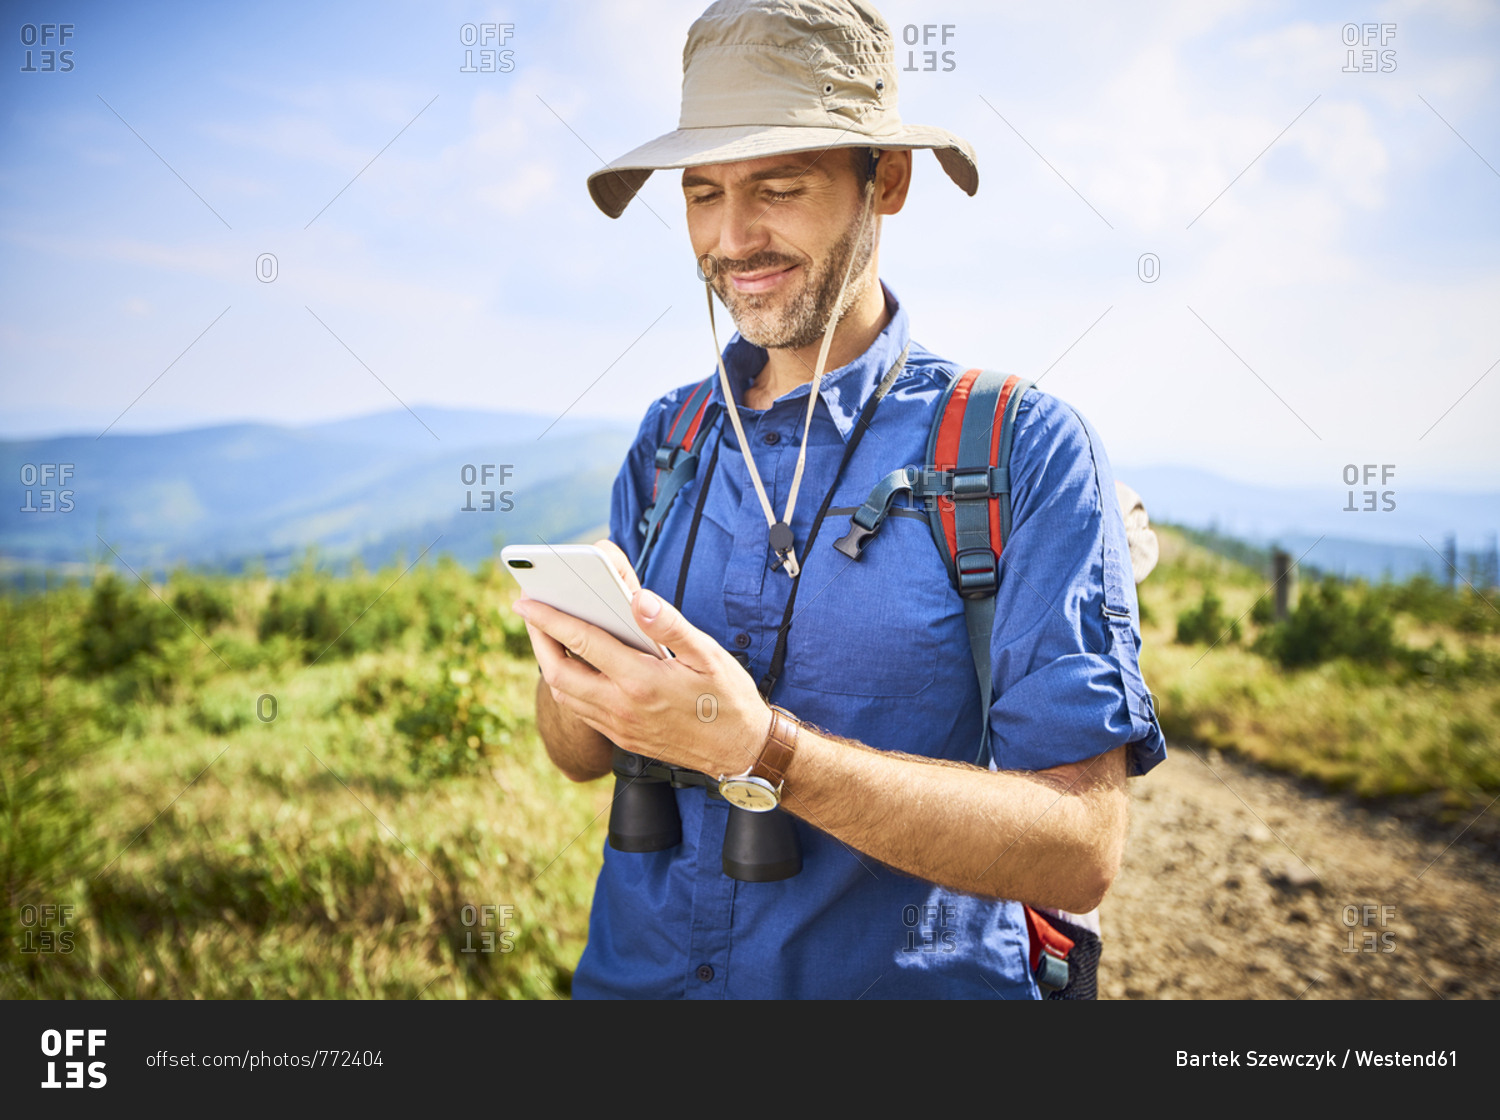 Smiling man checking his cell phone during hiking trip